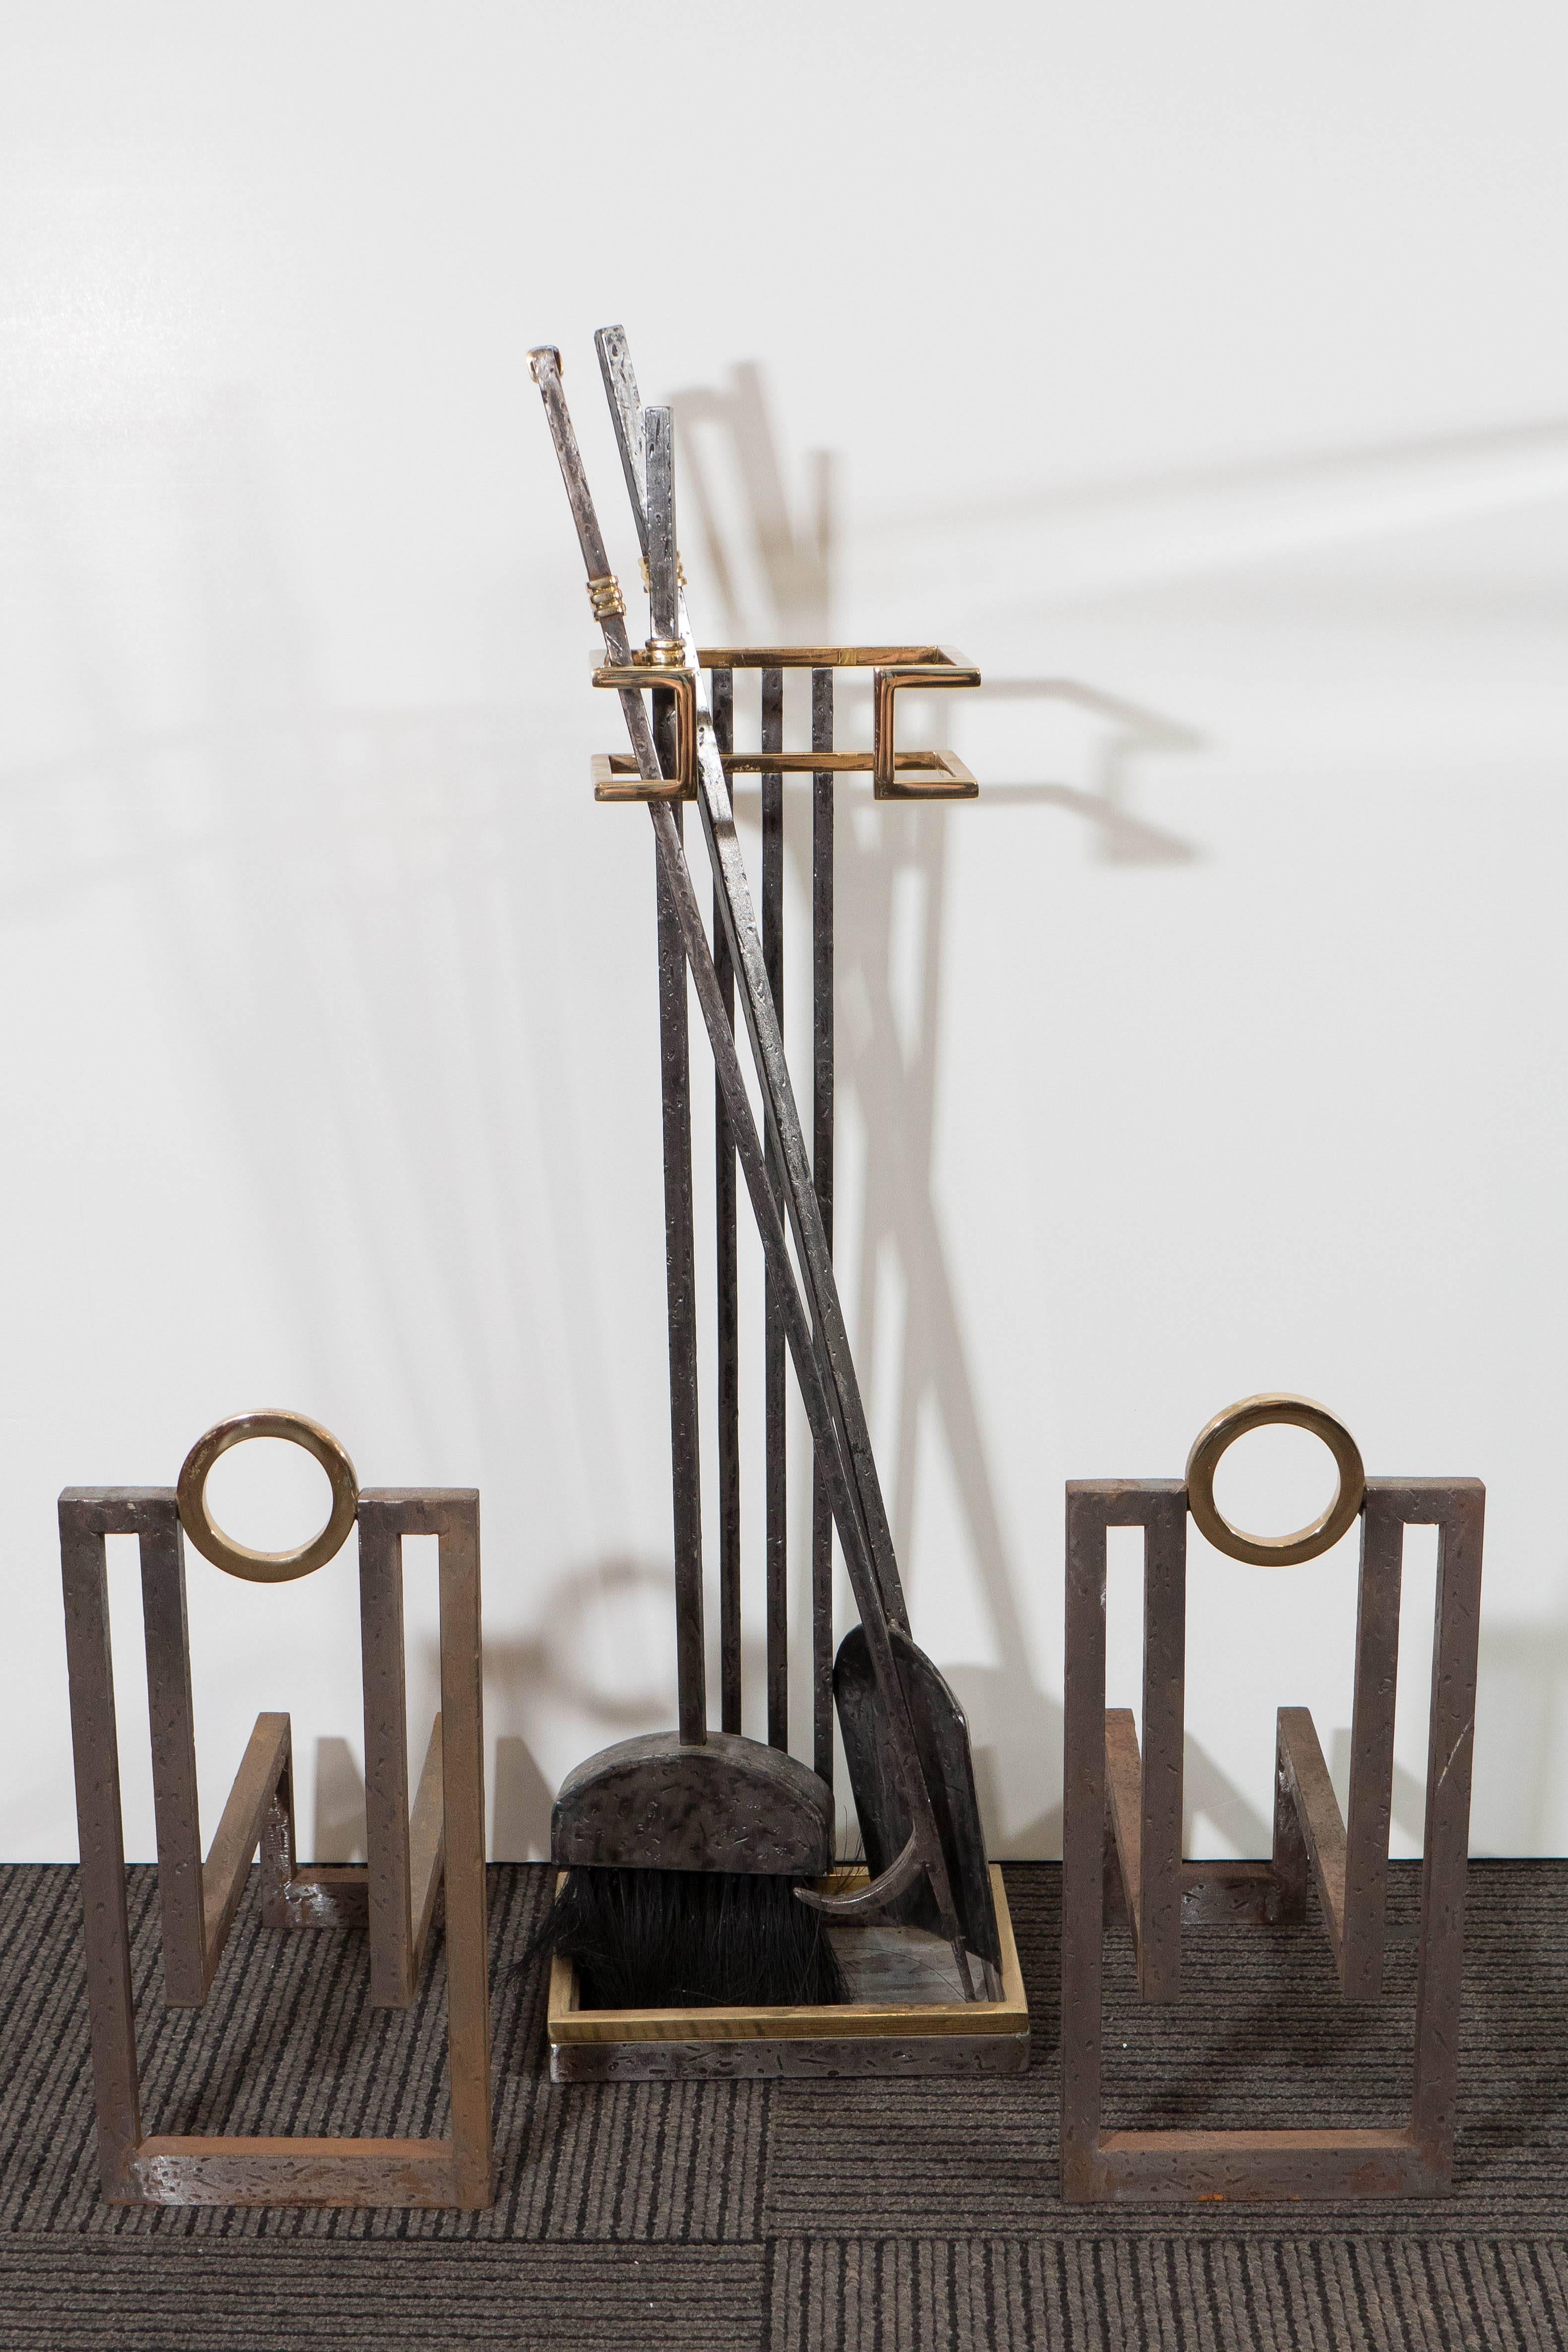 A highly modernistic fireplace arrangement, produced circa 1980s, including a pair of andirons and a set of tools on stand, with brush, shovel and poker, in mixed metals, wrought iron and brass. Overall good condition, presence of wear and some